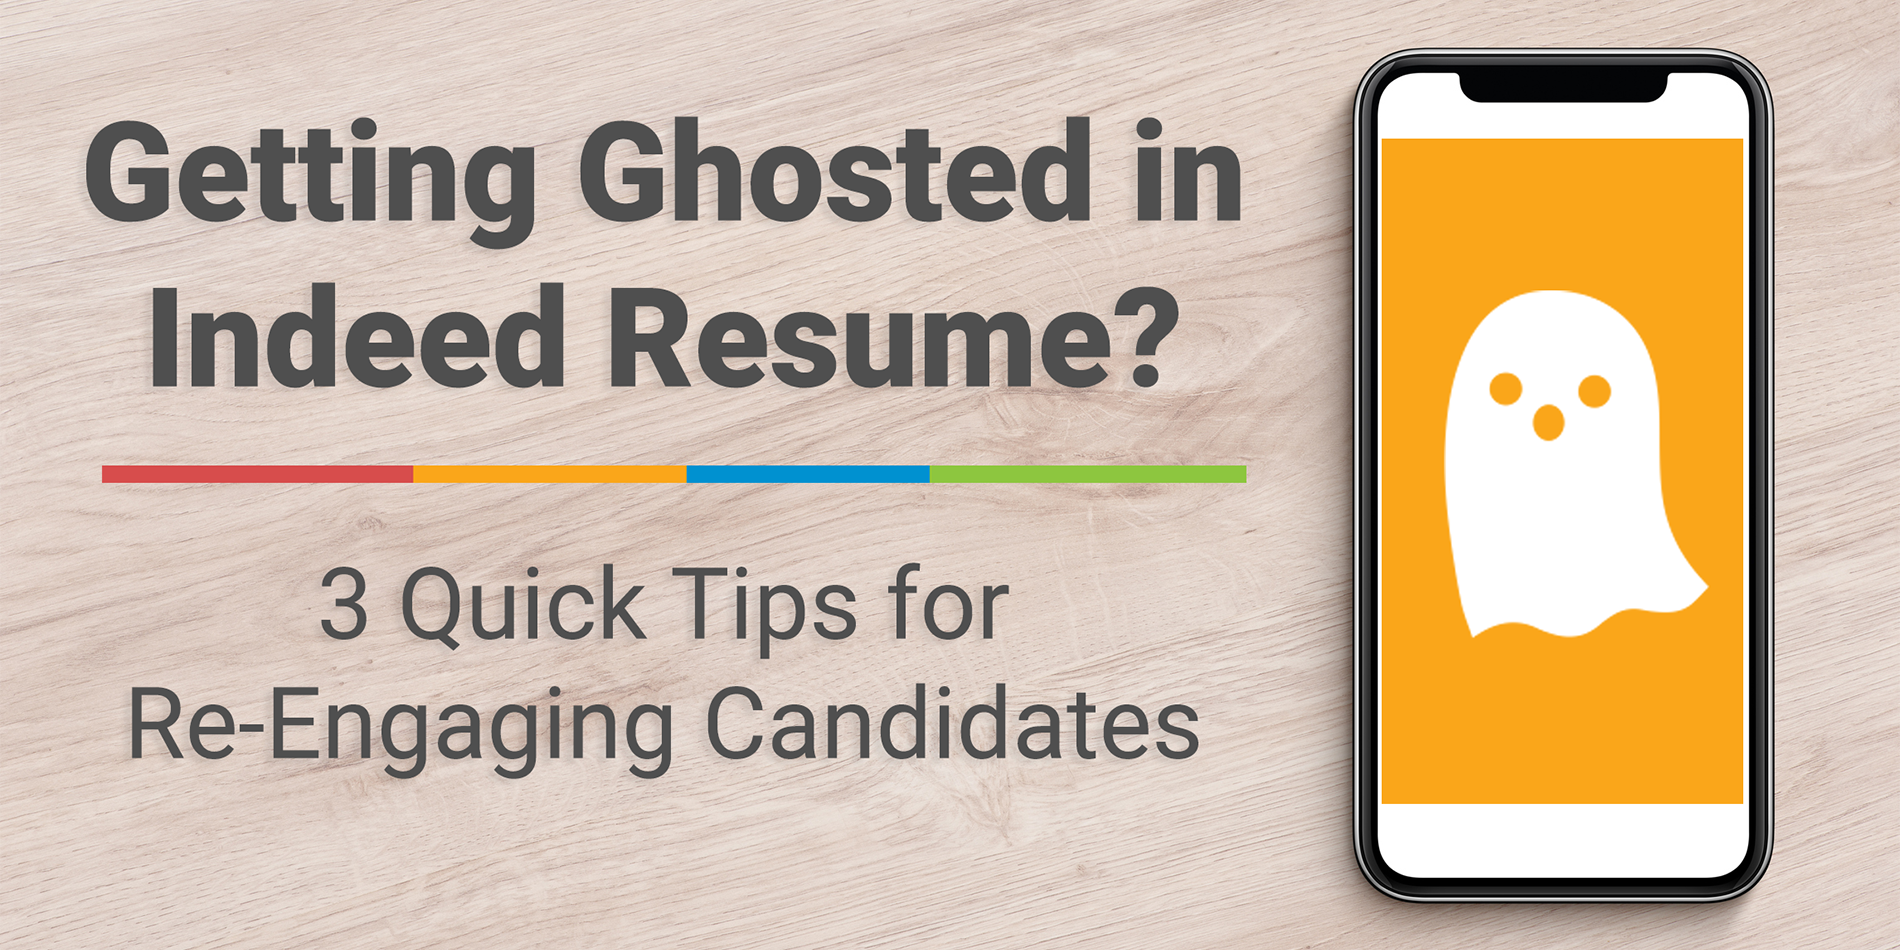 Getting Ghosted in Indeed Resume? 3 Quick Tips for Re-Engaging Candidates